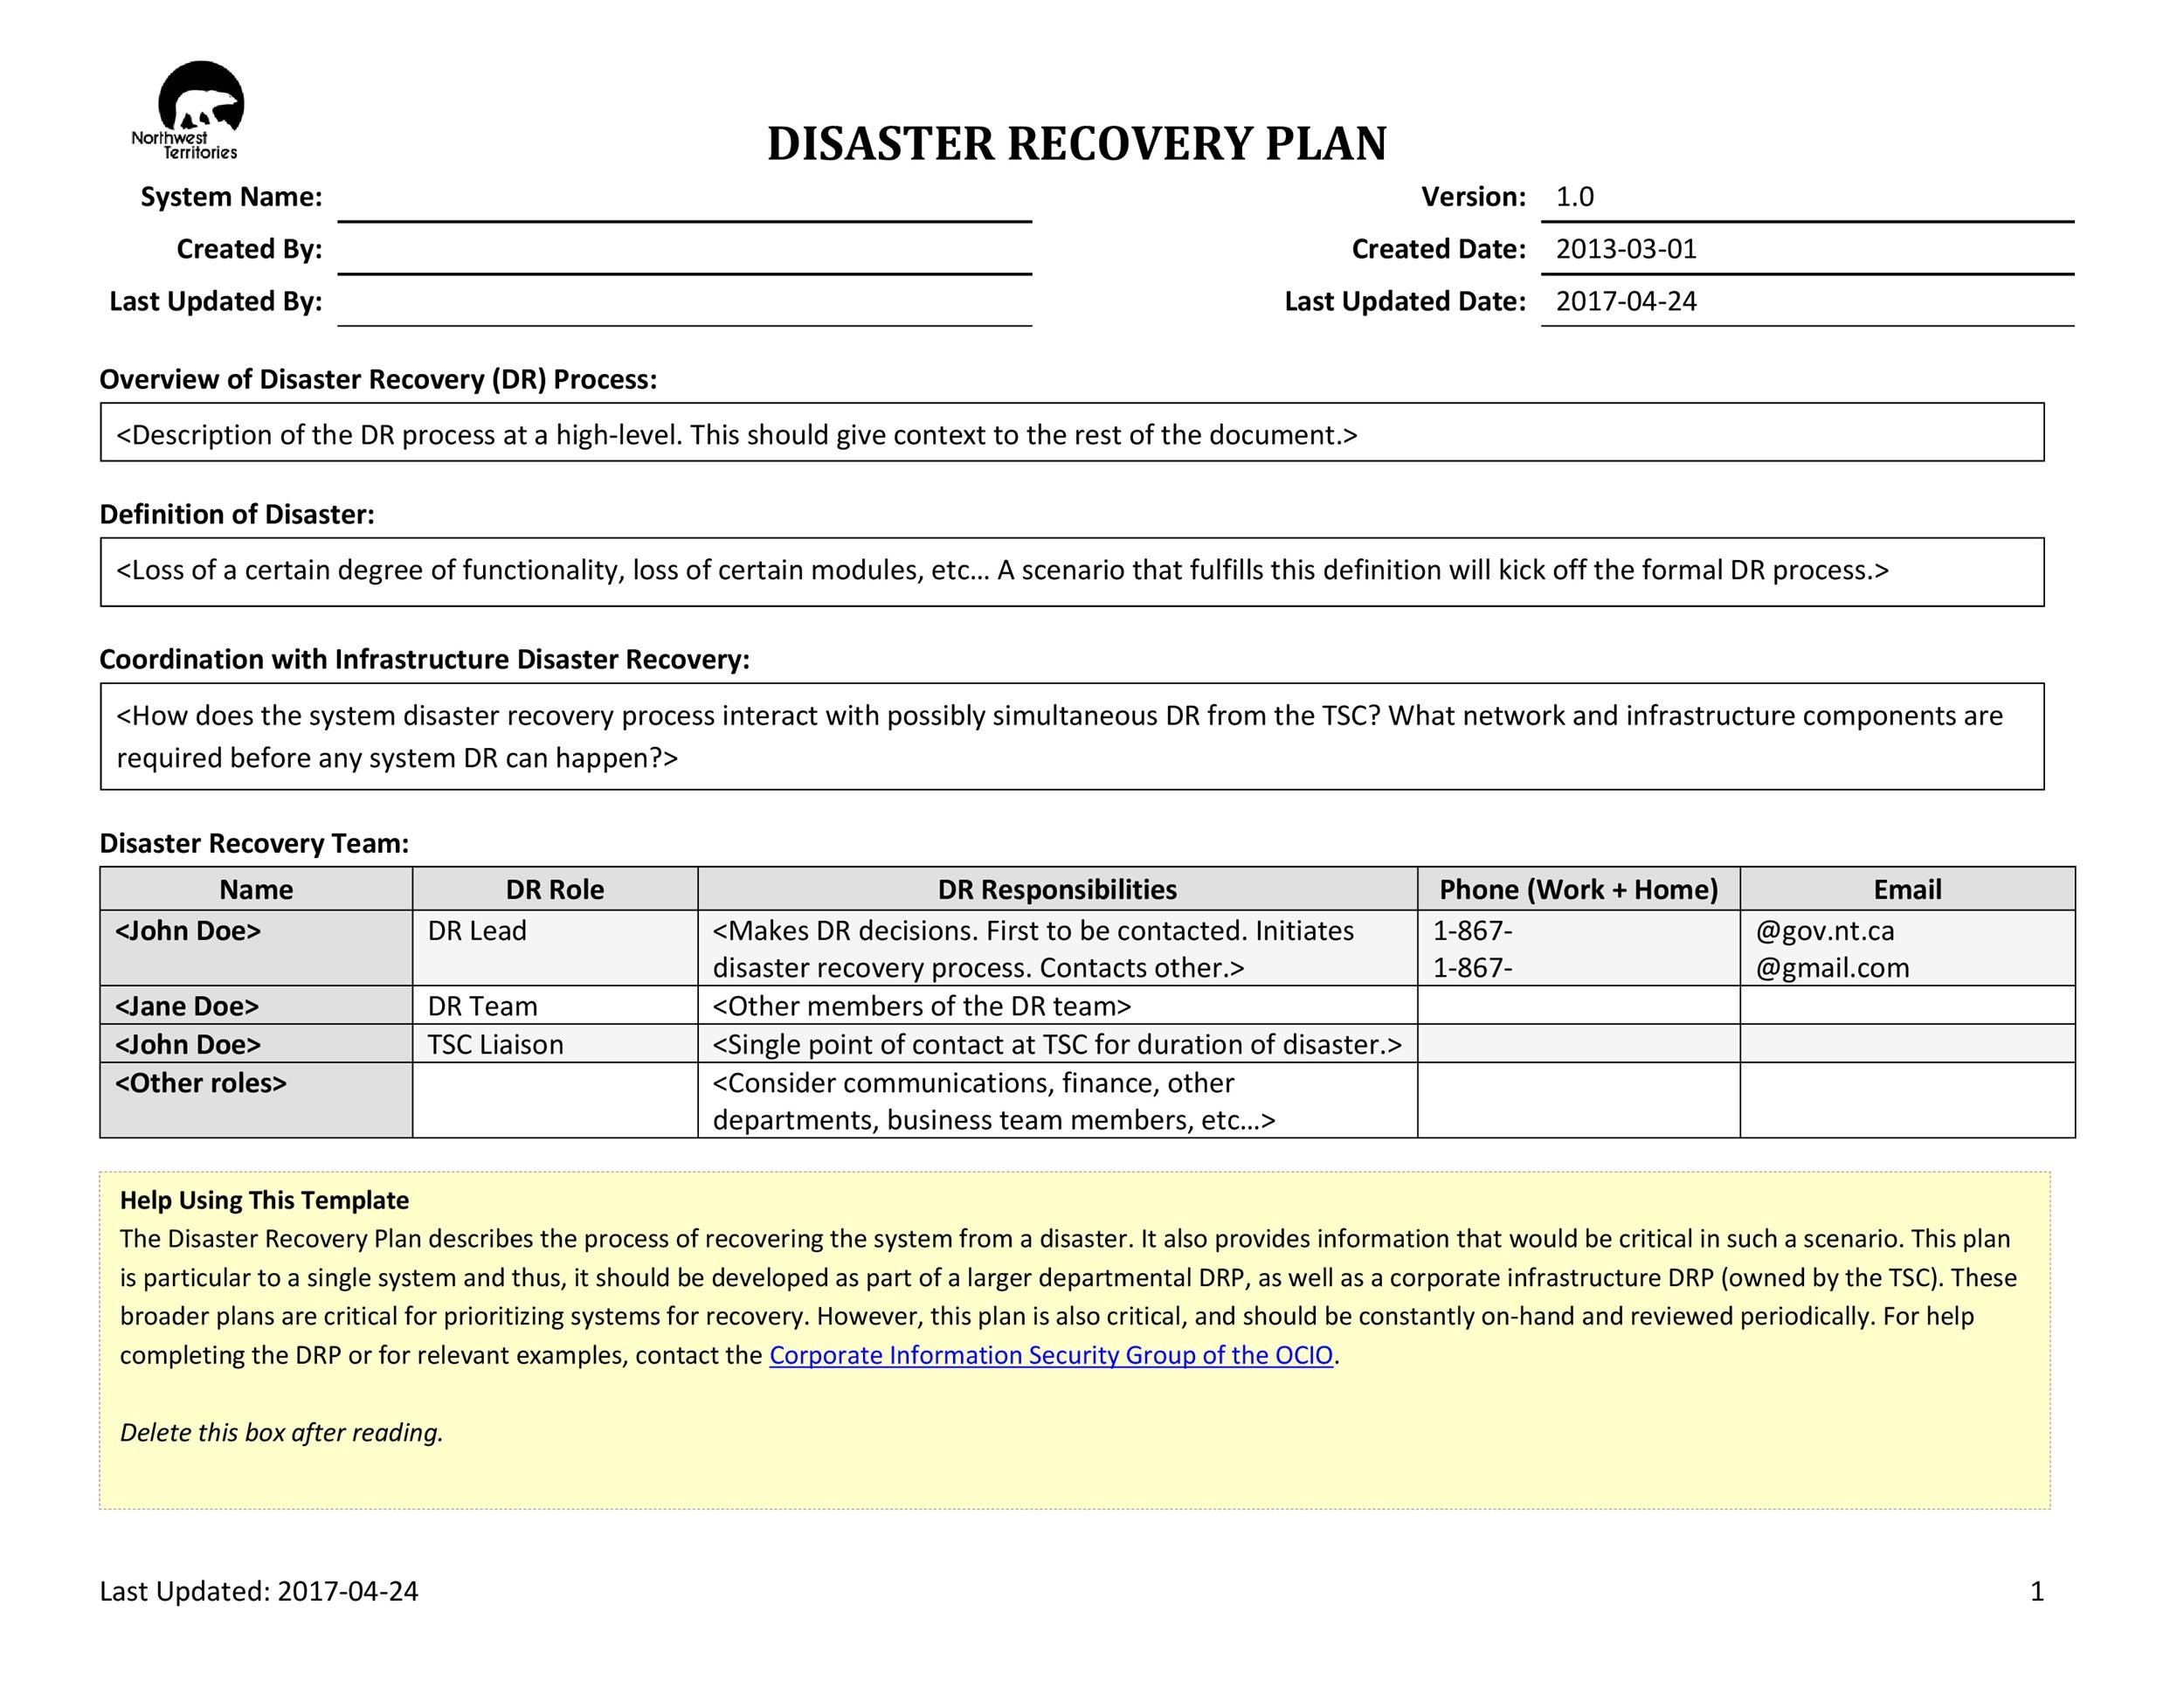 52 Effective Disaster Recovery Plan Templates DRP TemplateLab